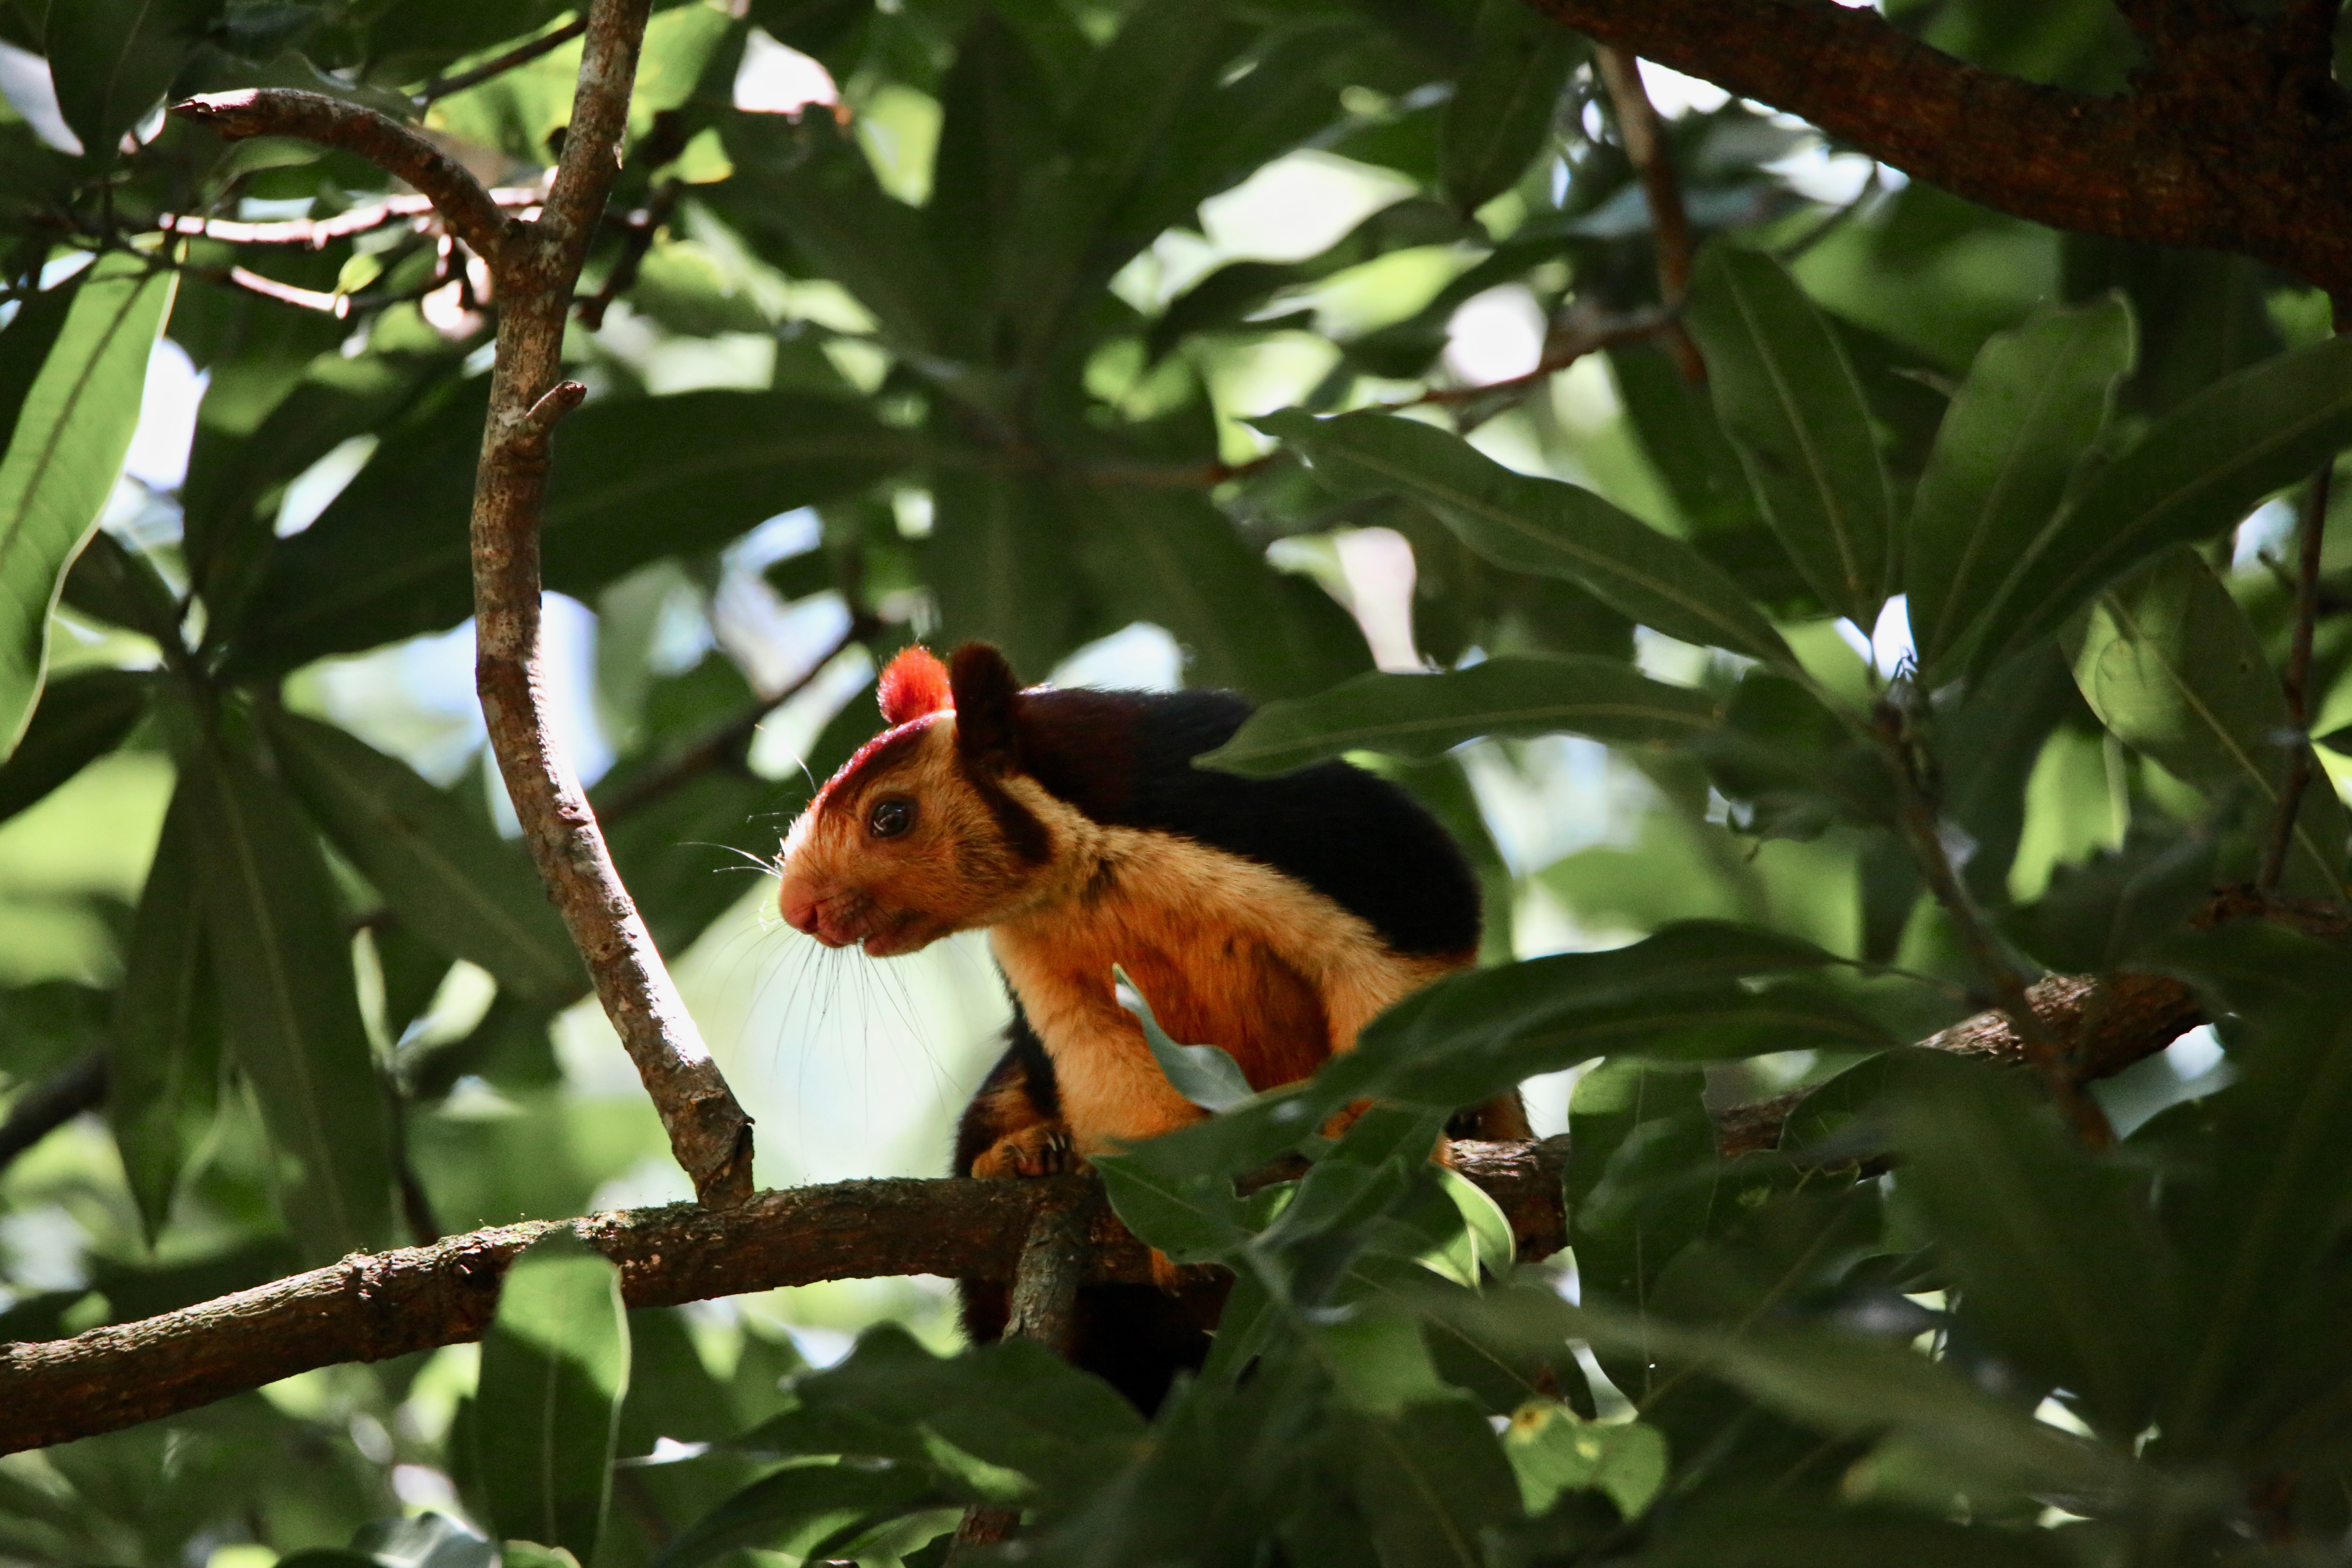 Indian Giant Squirrel images